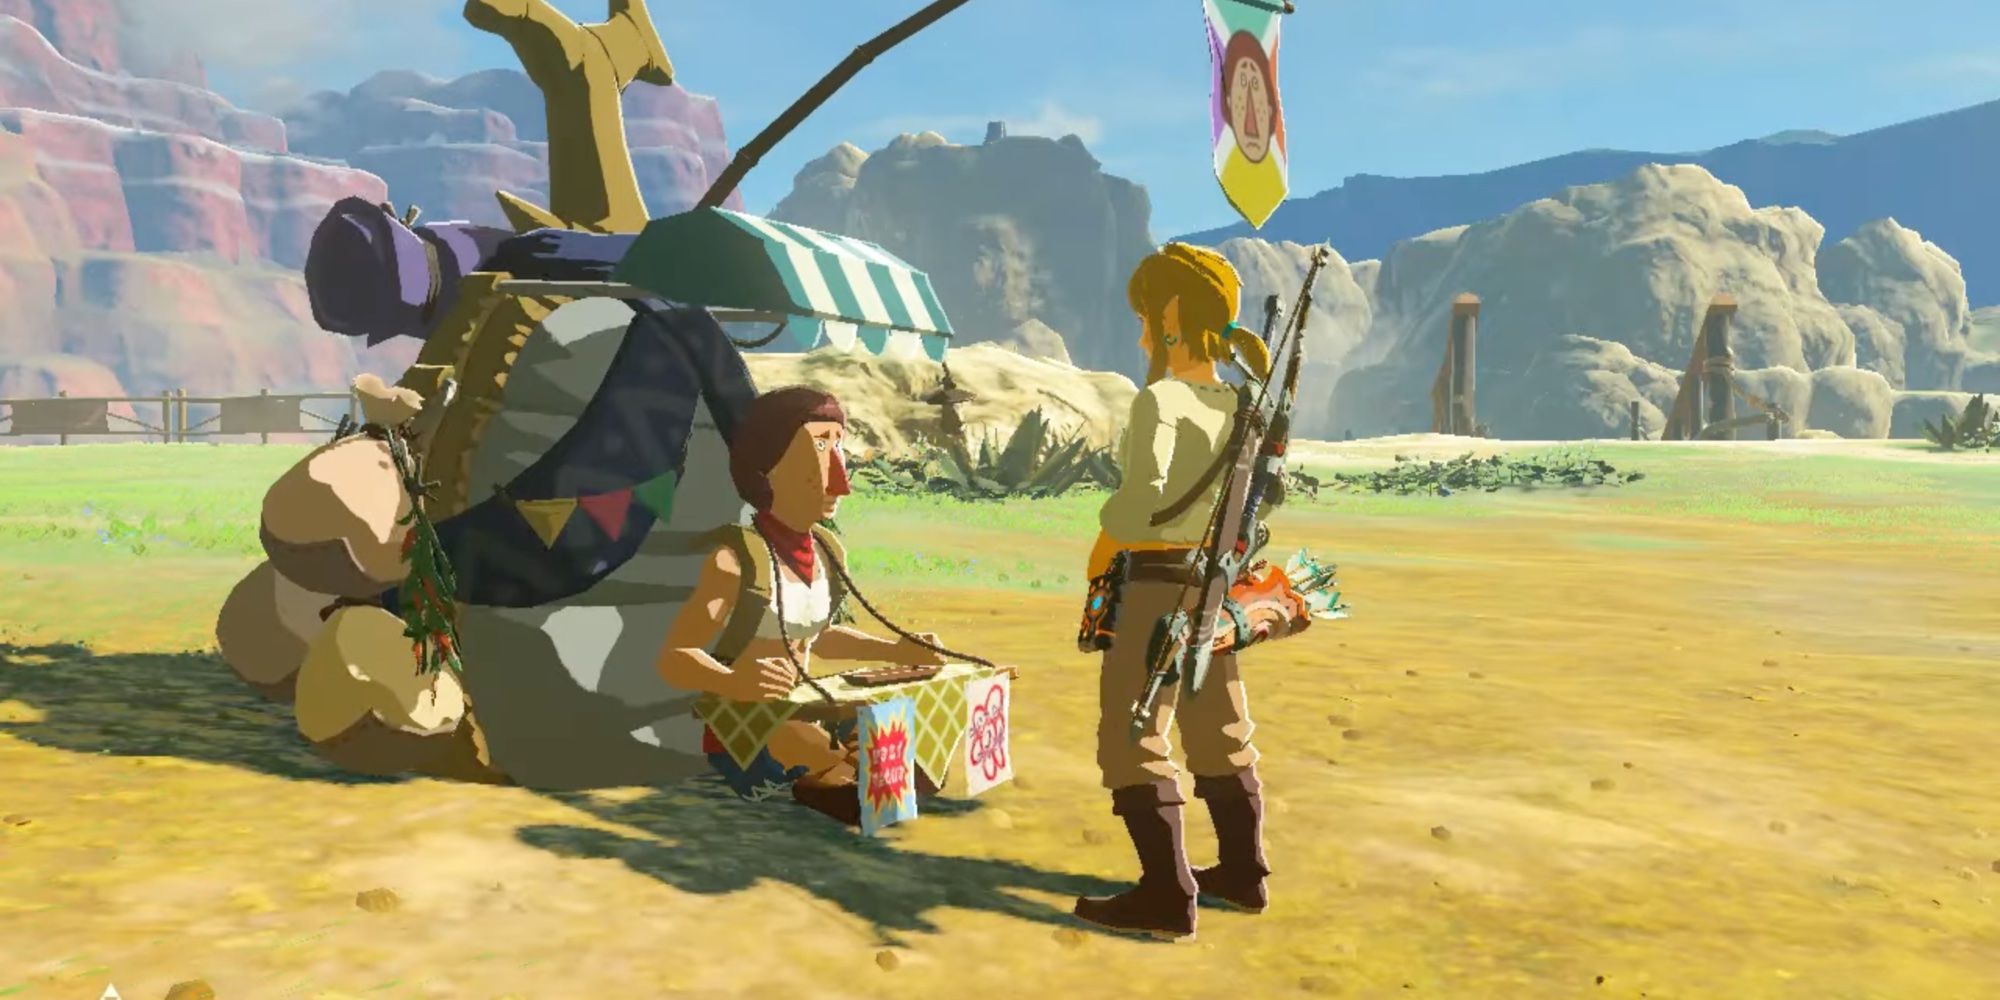 Beedle selling his wares in the side of the road